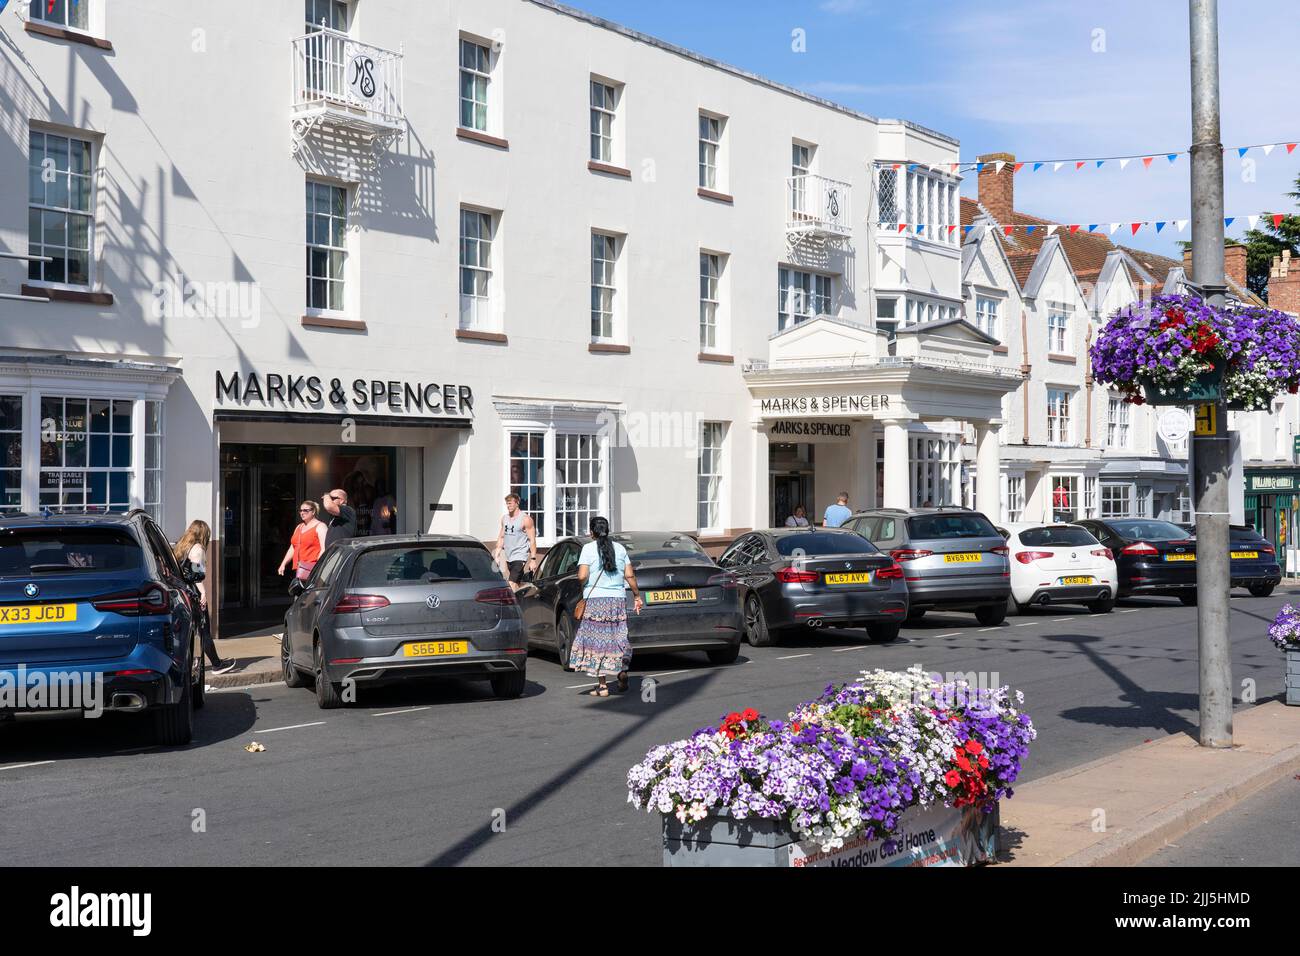 Shoppers entering and leaving Marks and Spencer on Bridge Street in summer, July, in Stratford upon Avon, England. Concept - department store, chain Stock Photo